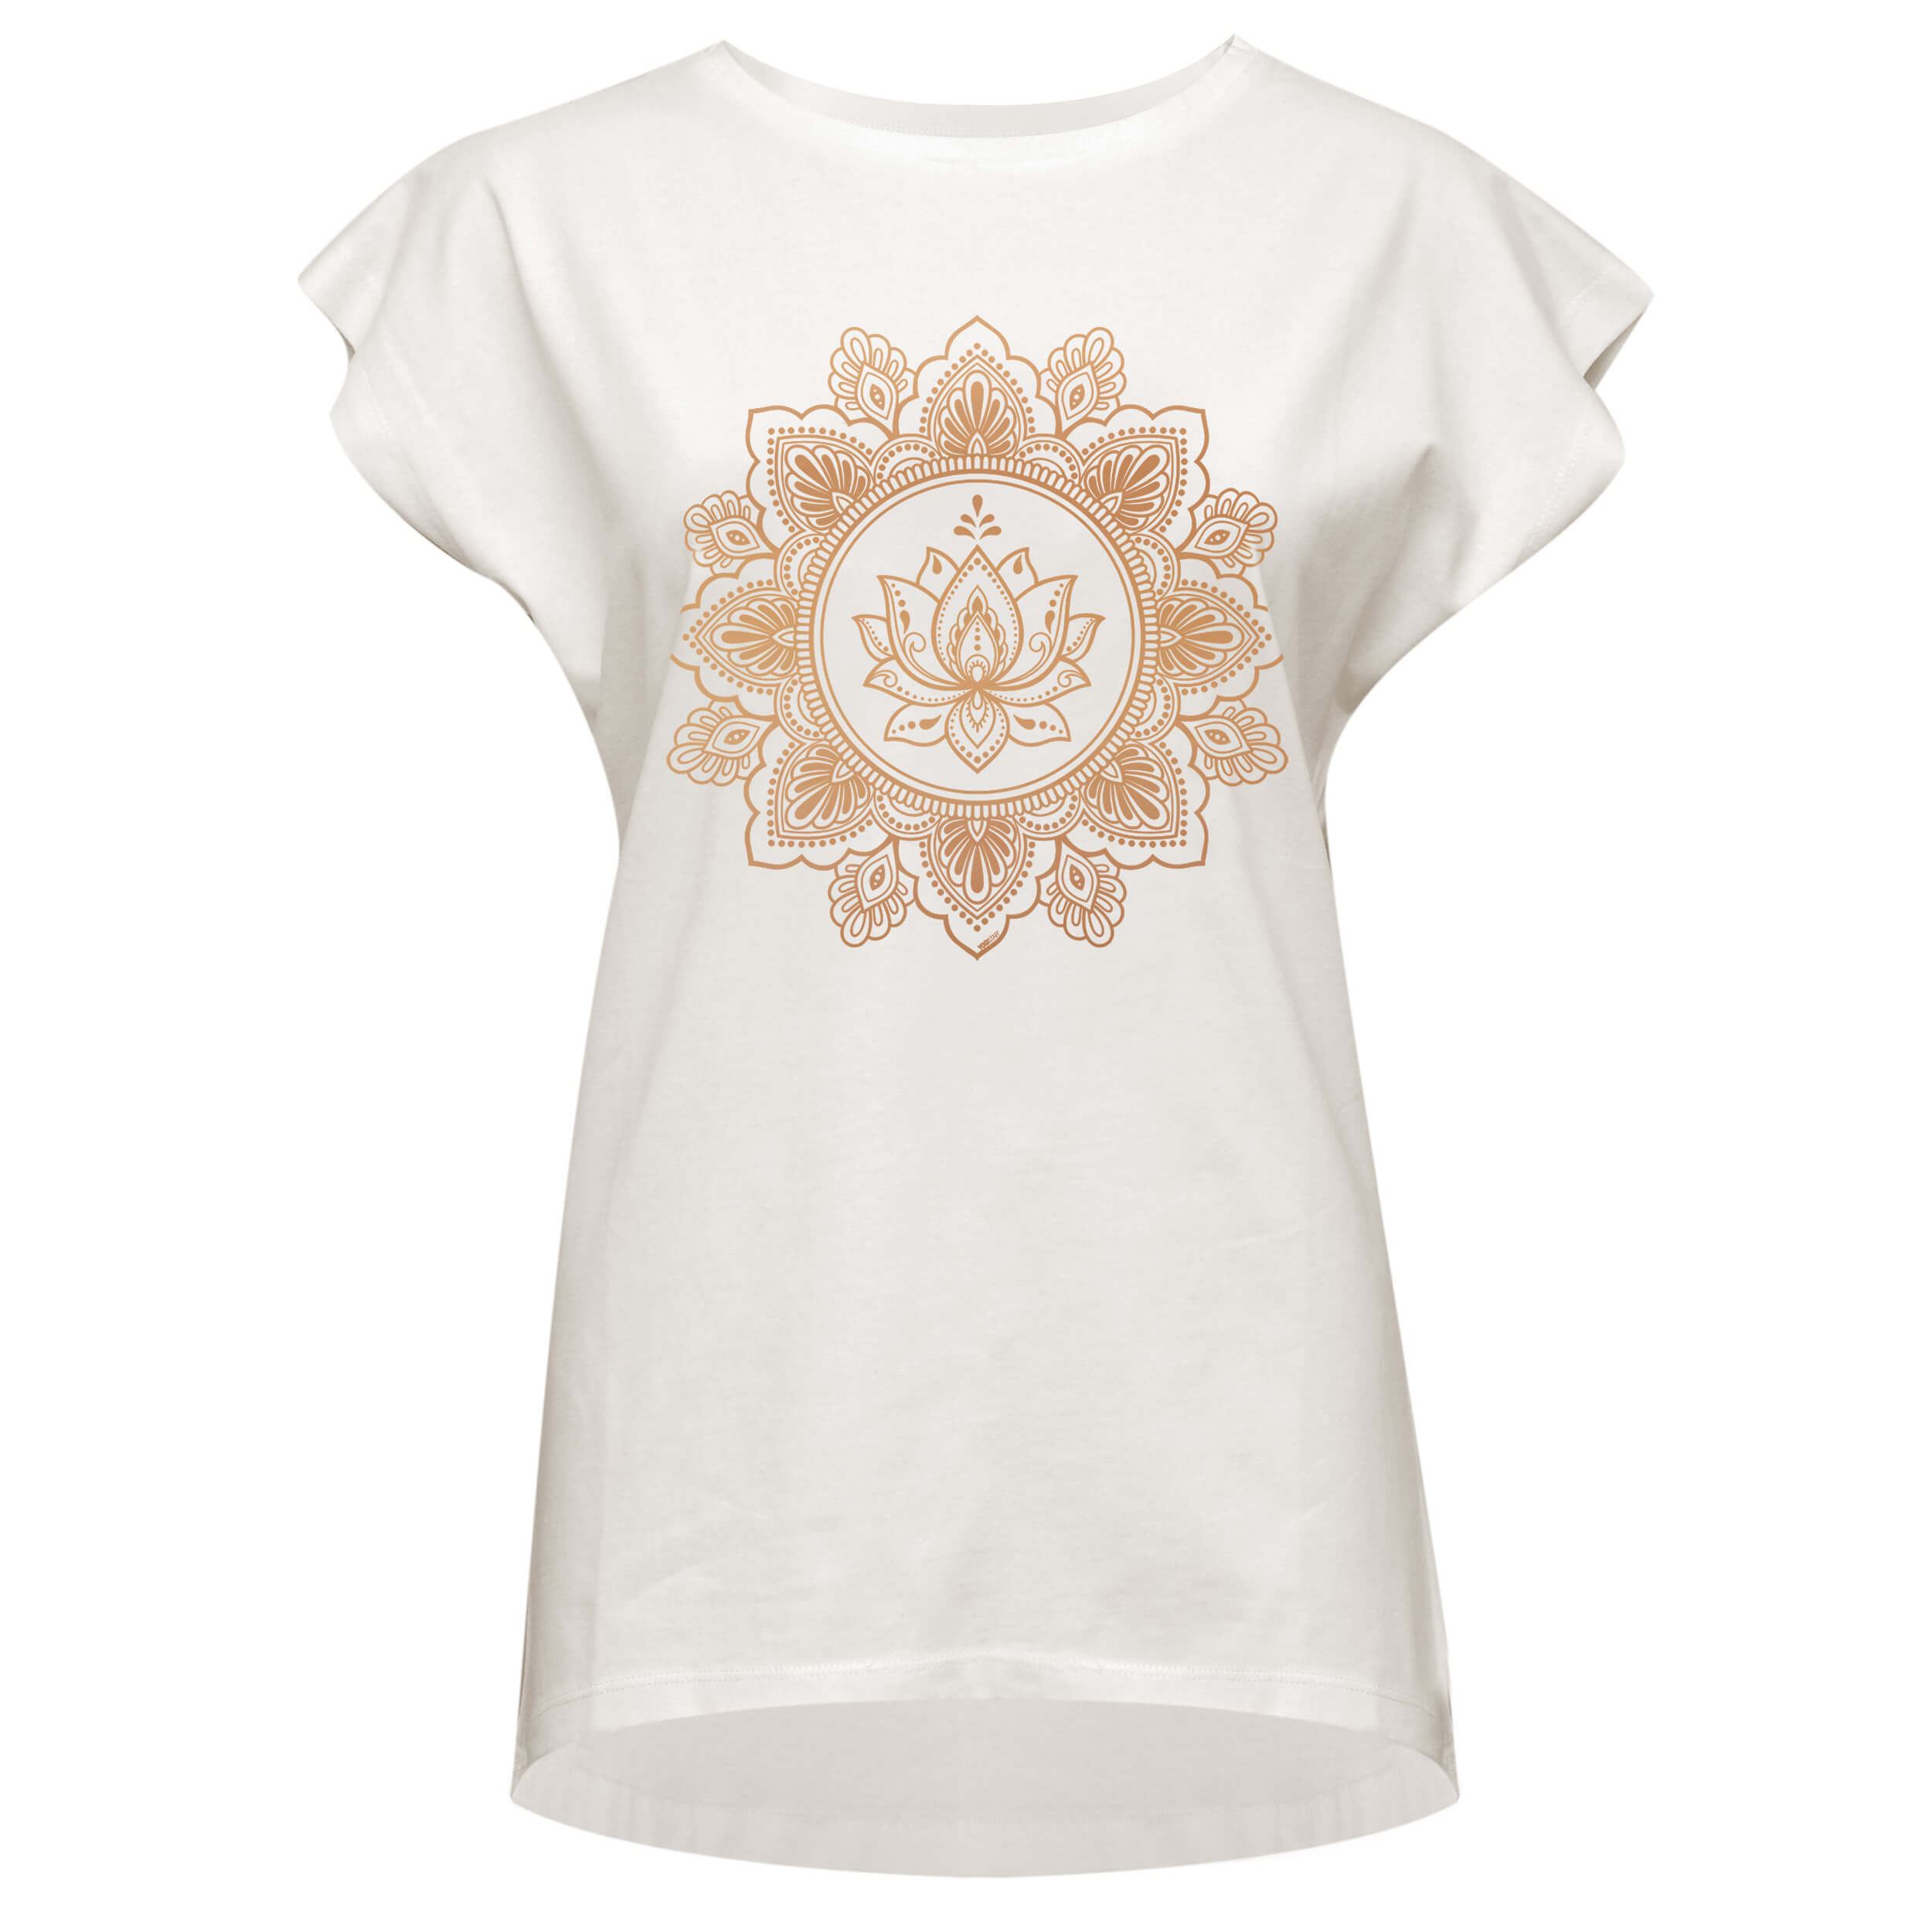 https://www.yogishop.com/out/pictures/master/product/1/yoga_tshirt_batwing_lotus_ivory_front_web2500.jpg